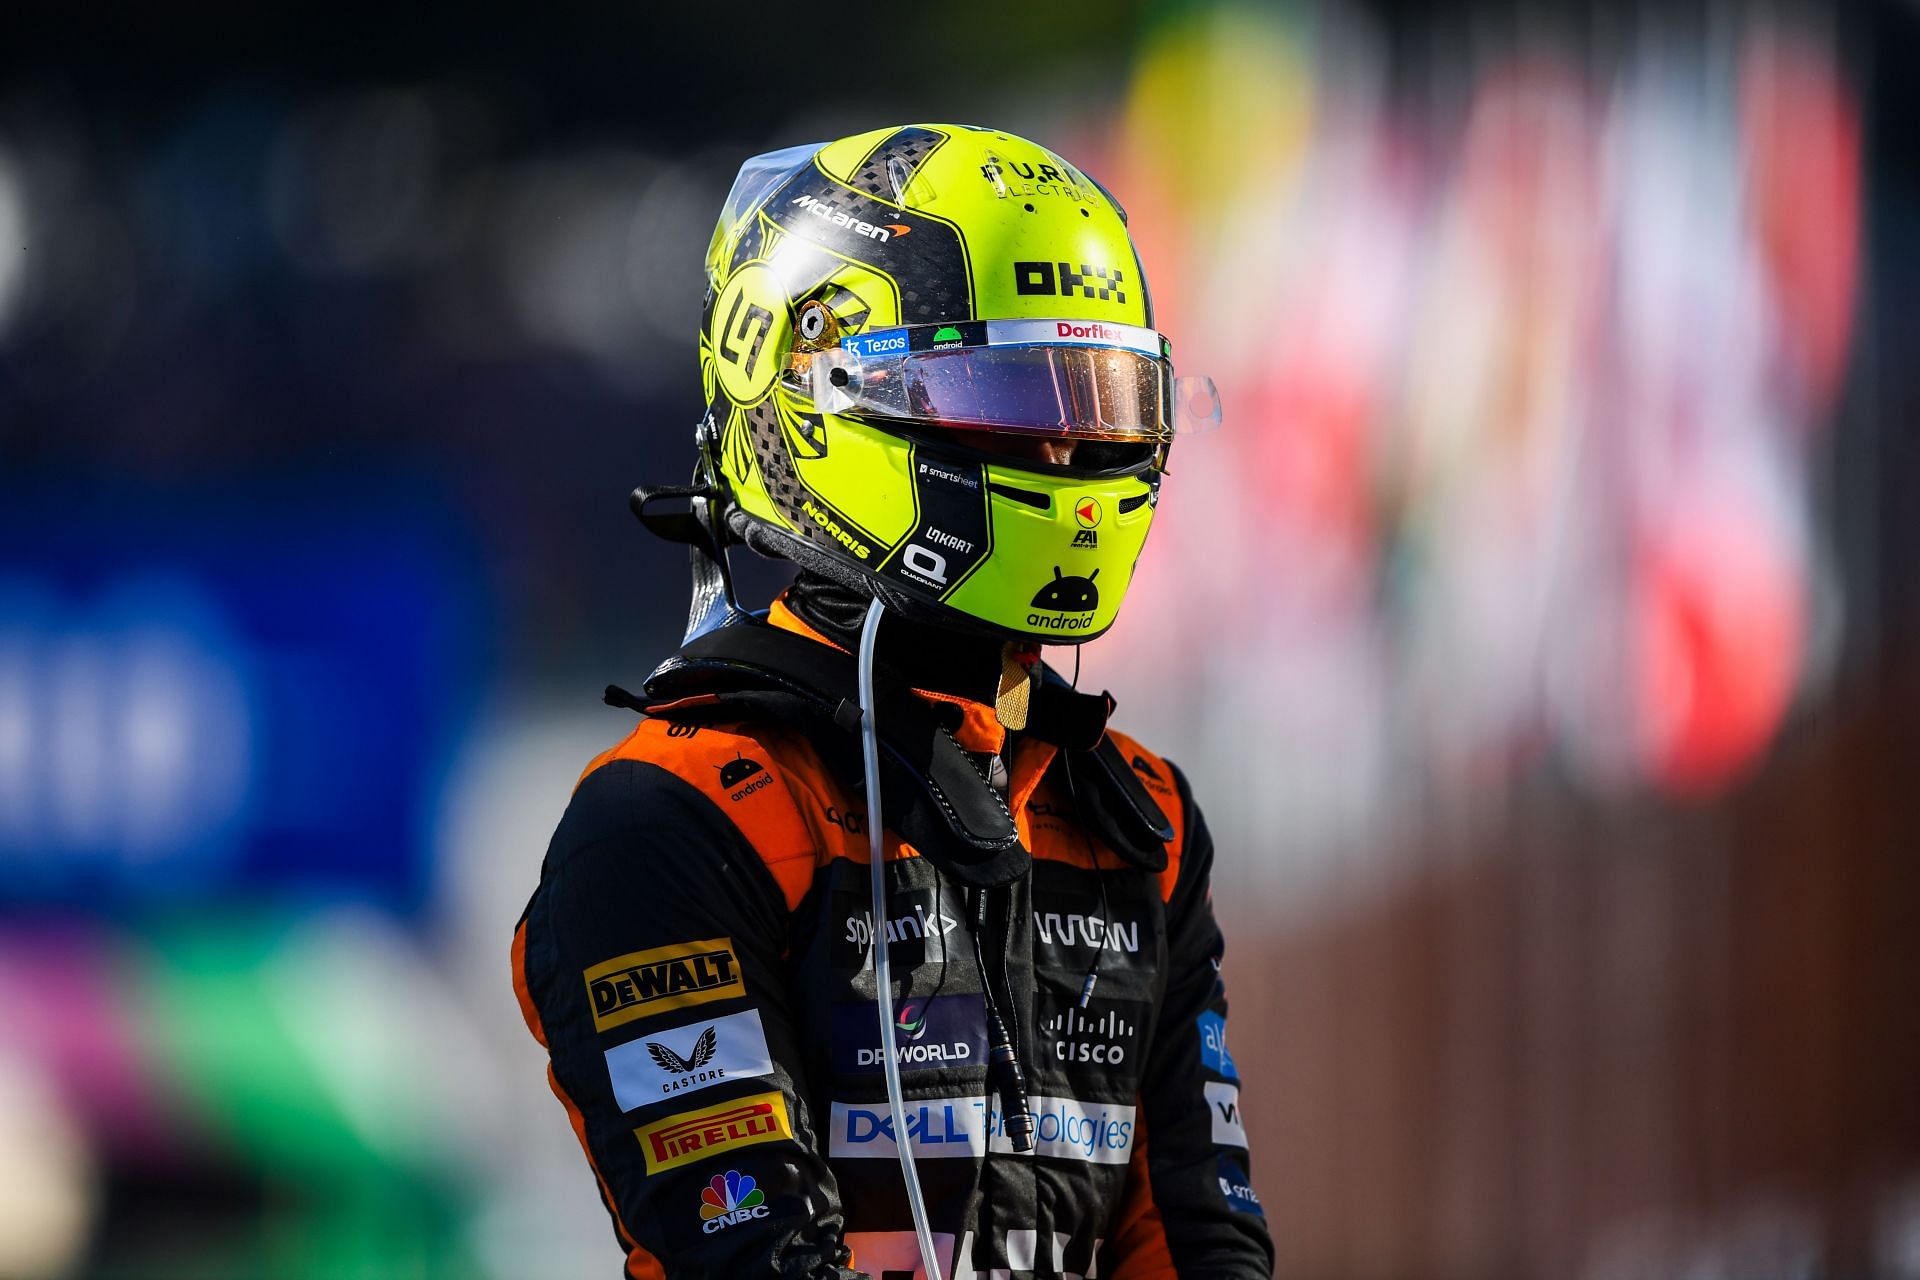 Martin Brundle gives Lando Norris a 'piece of advice' he didn't ask for